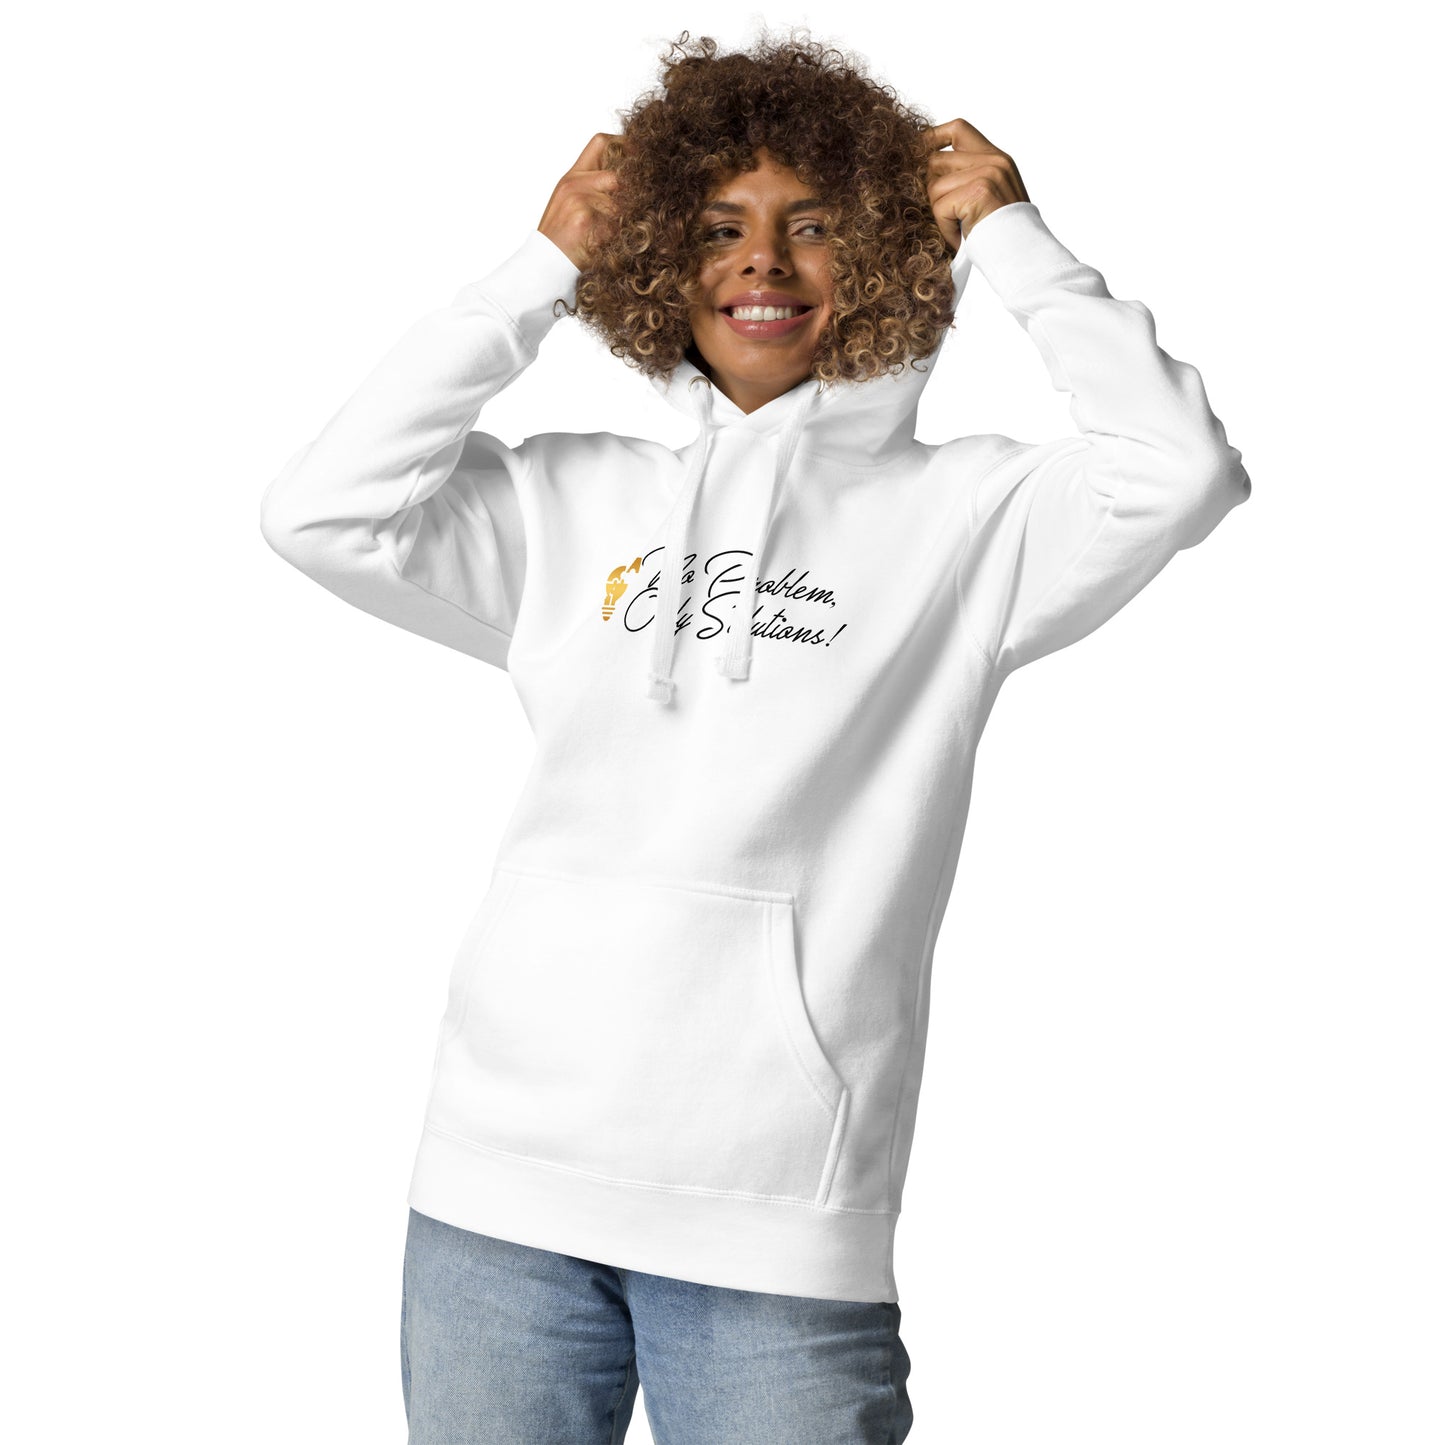 No Problem, Only Solutions Unisex Hoodie